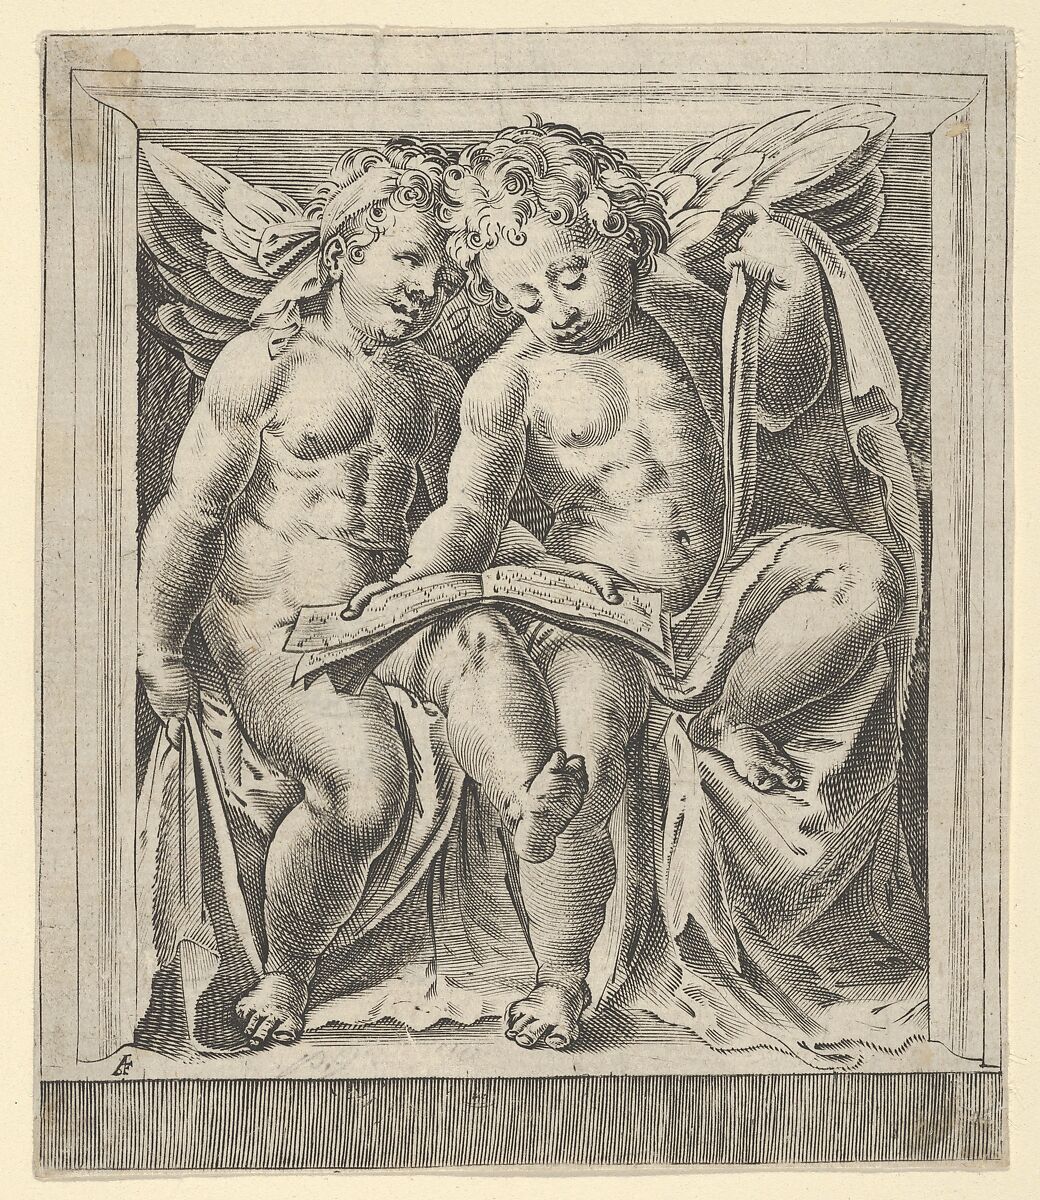 Two seated angels, facing left, reading from a song book, from The Angels' Concert, After Cherubino Alberti (Zaccaria Mattia) (Italian, Borgo Sansepolcro 1553–1615 Rome), Engraving (reverse copy) 